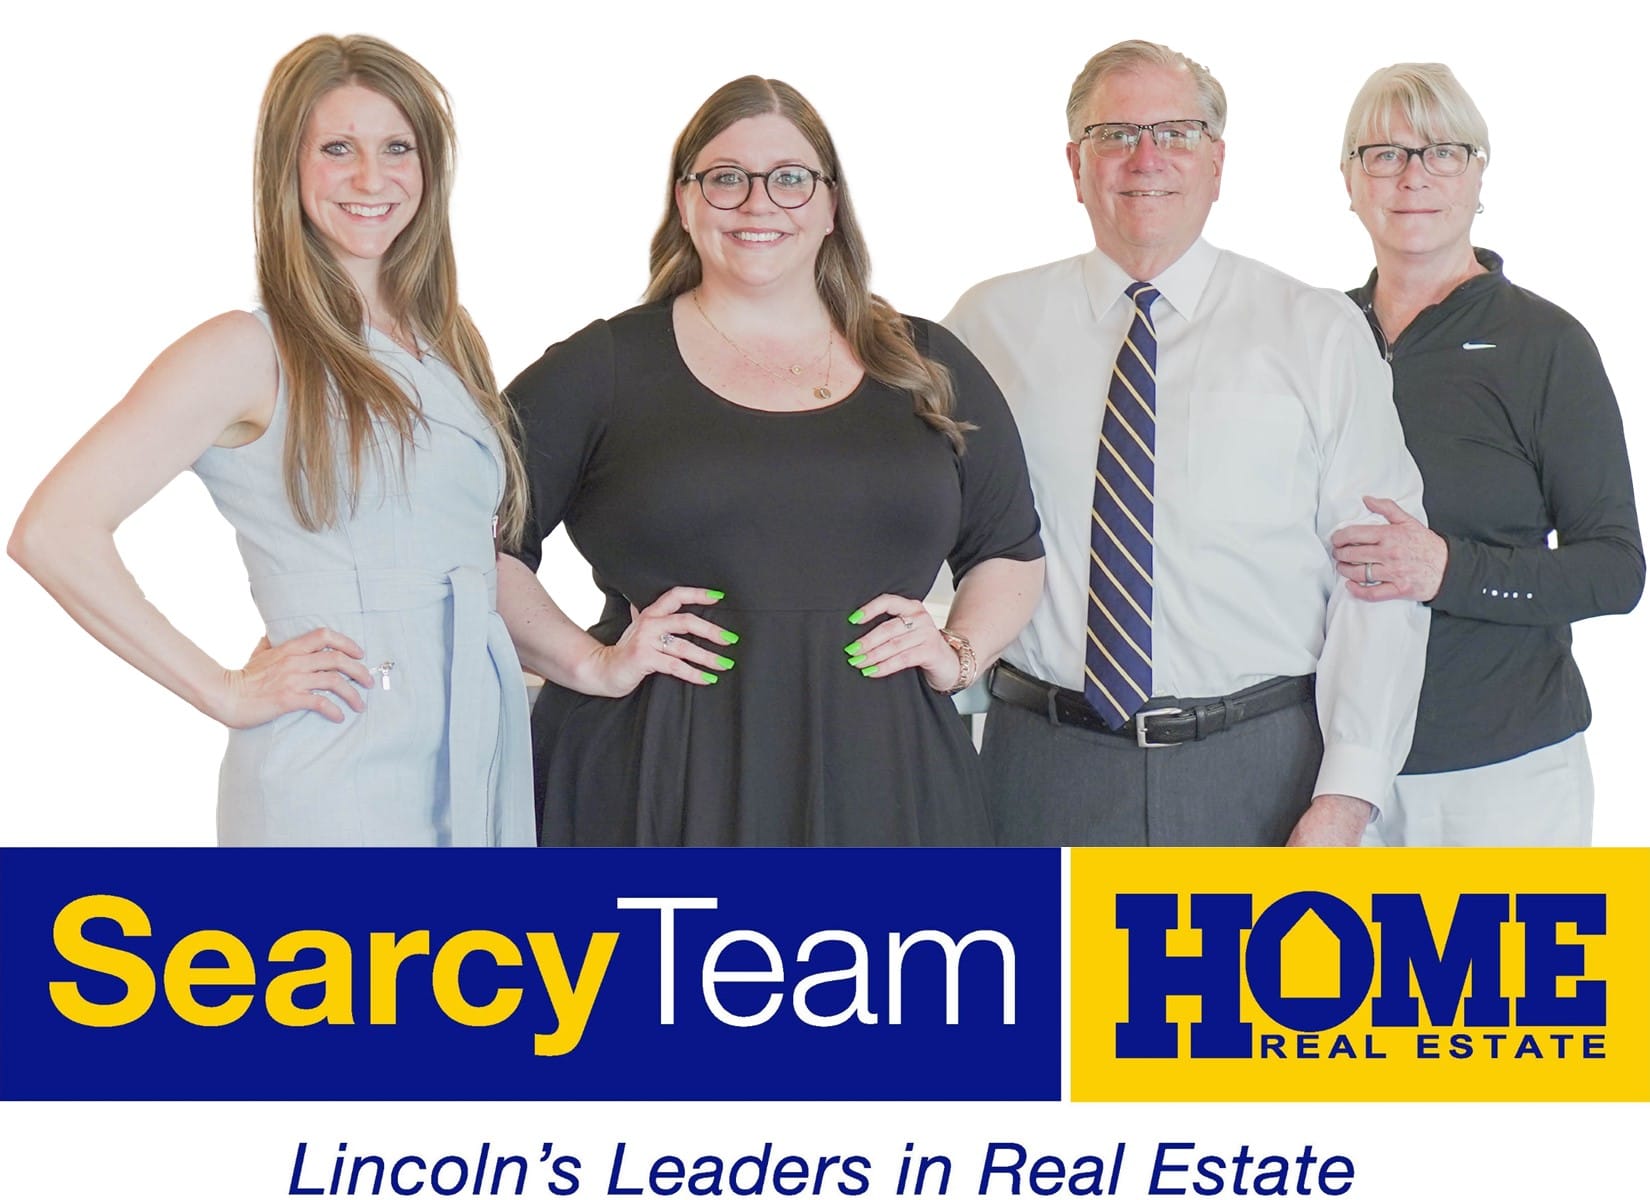 The Searcy Team